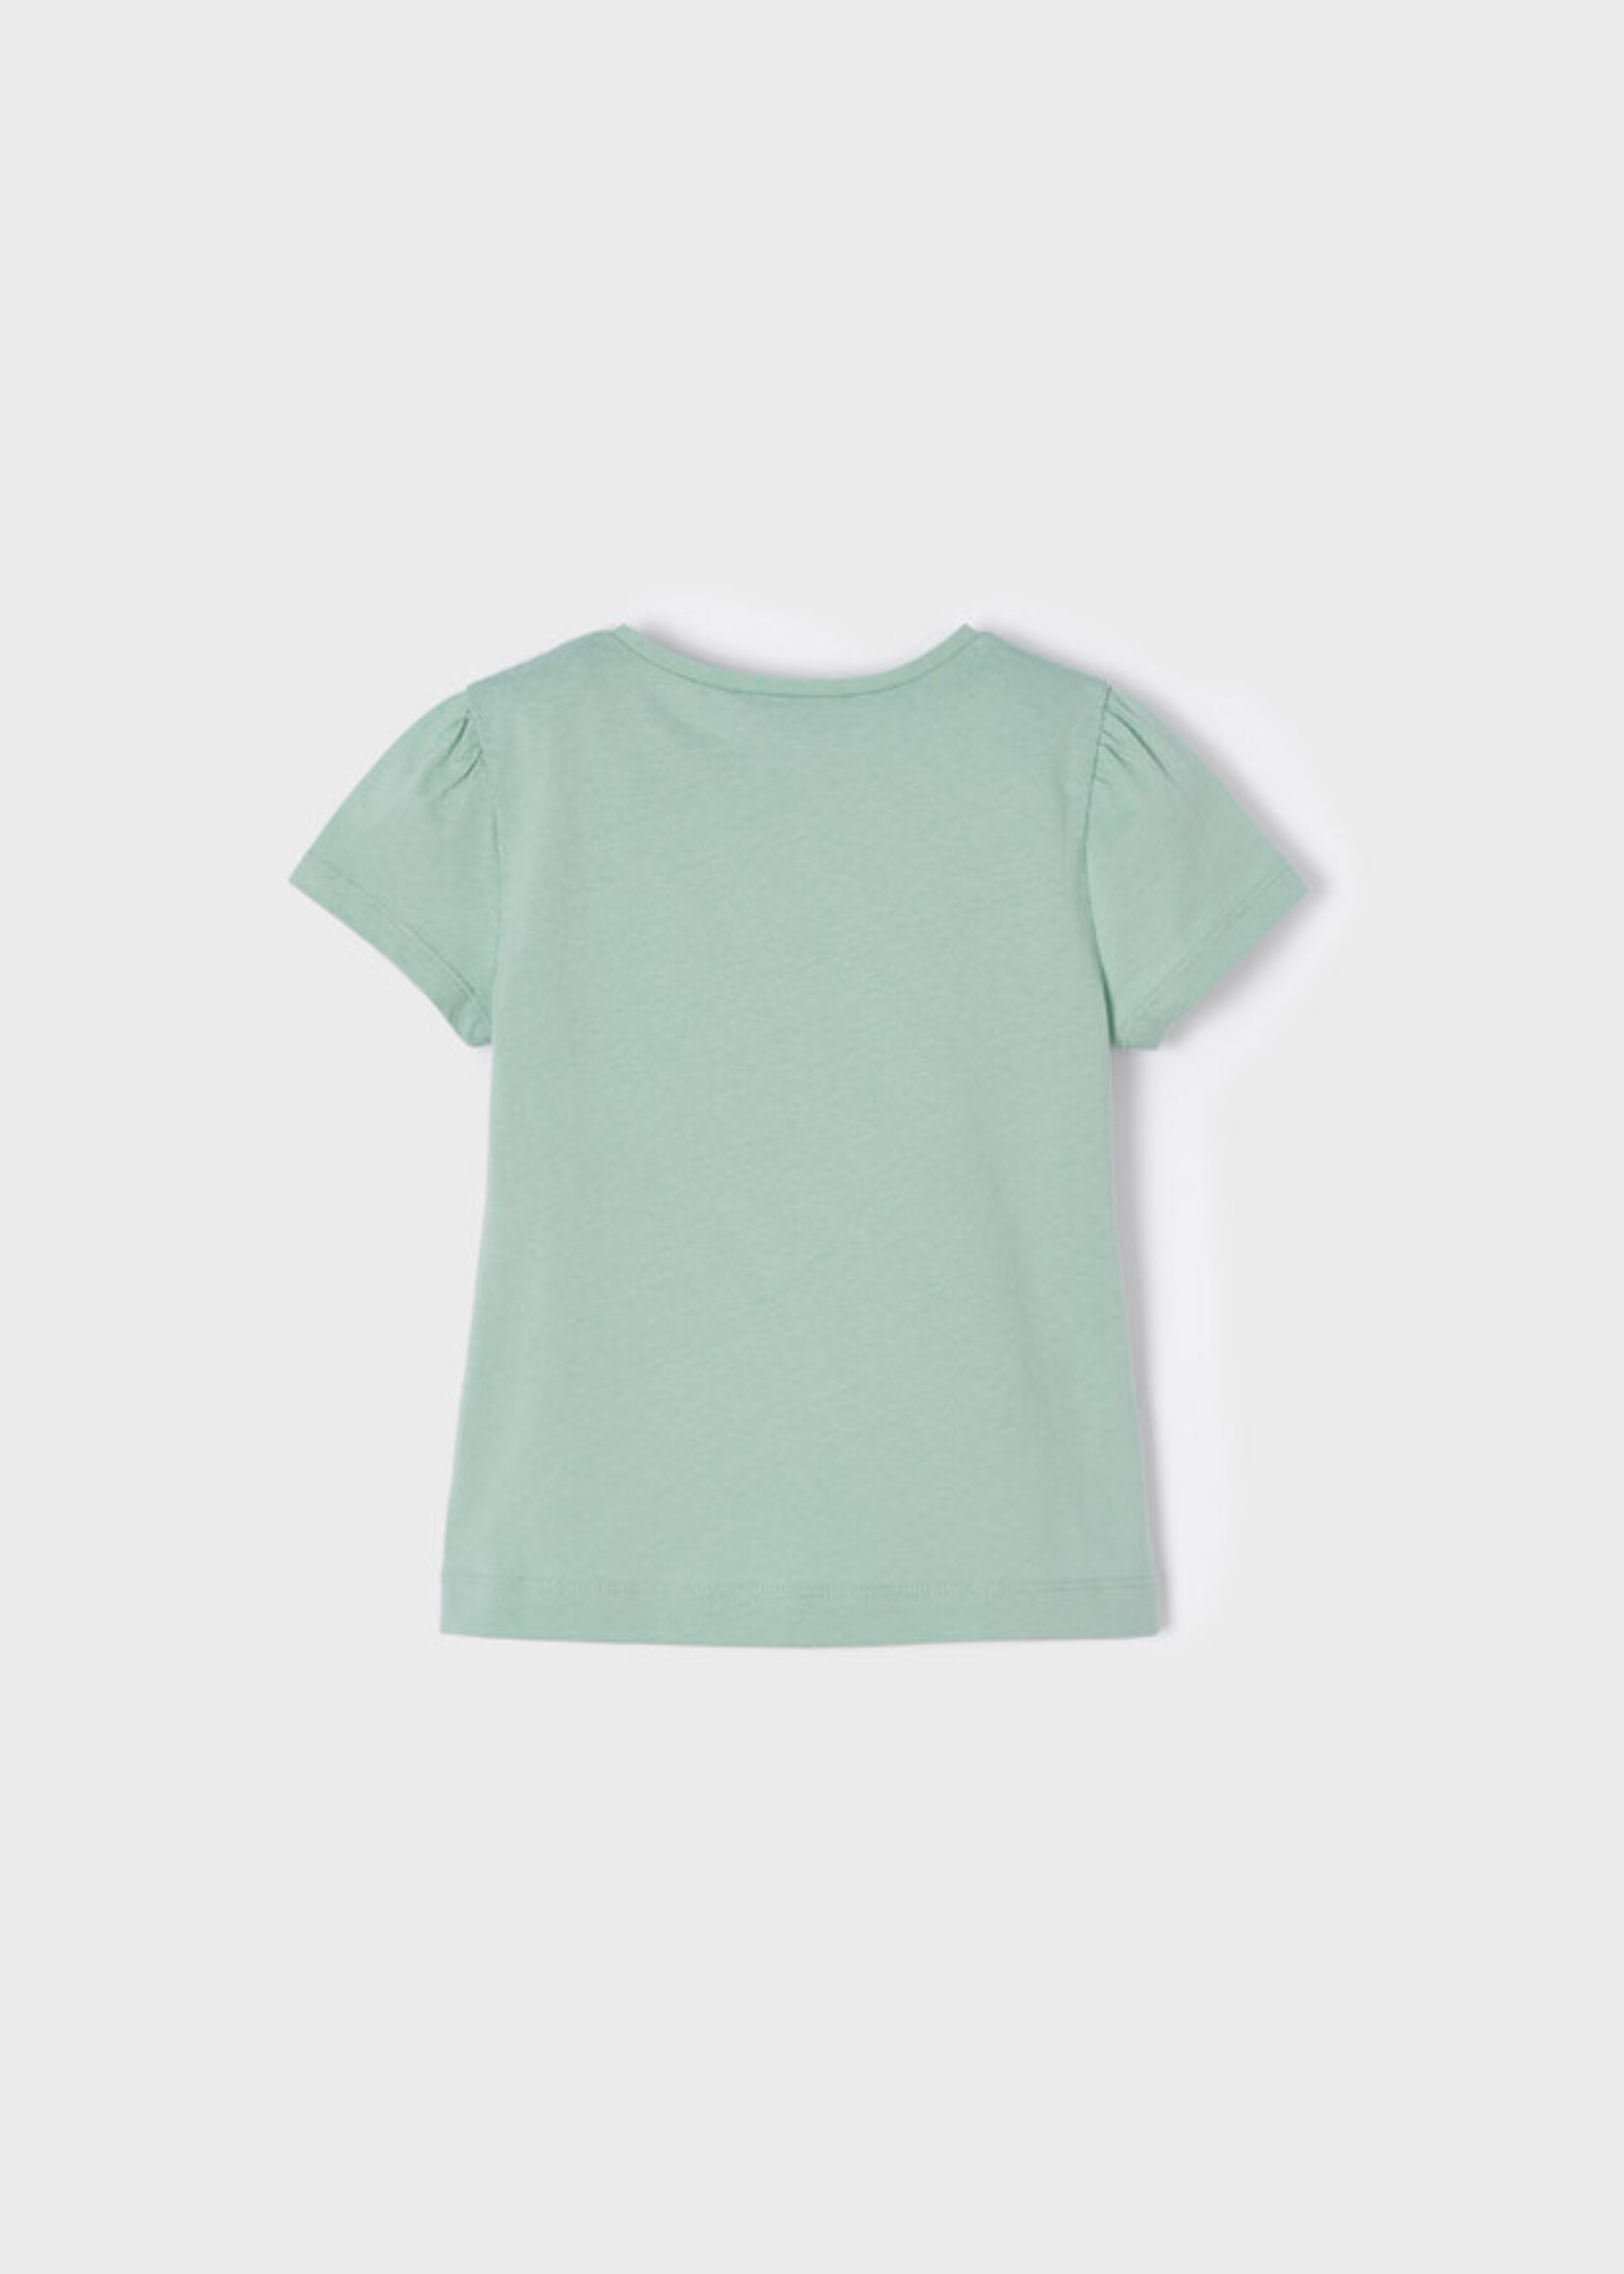 Mayoral Mayoral S/s bow t-shirt green- 22 03041